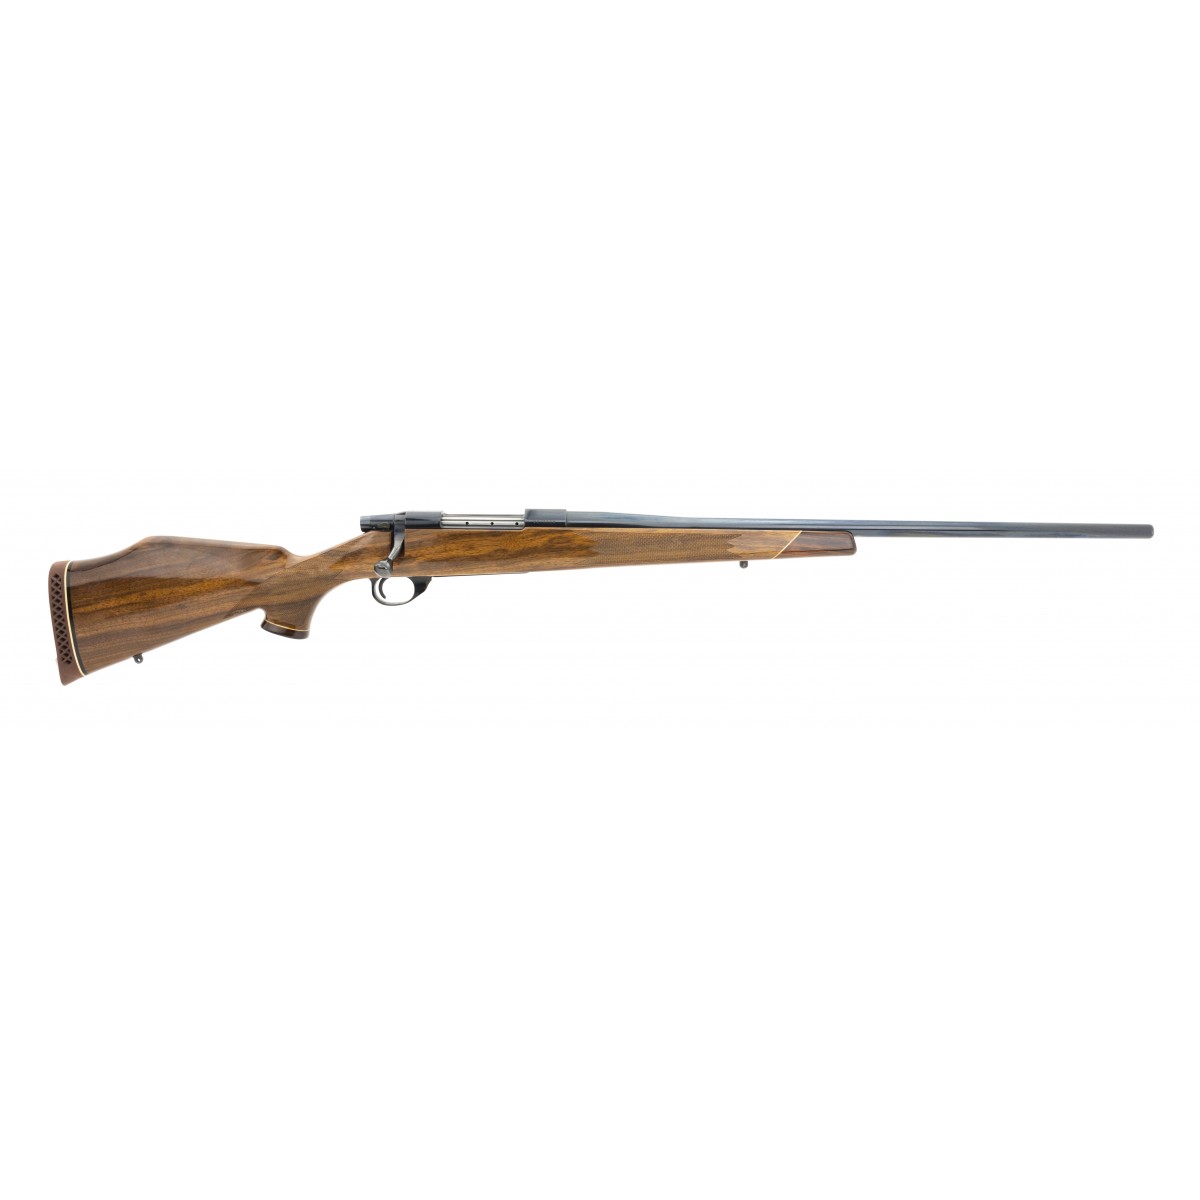 Weatherby Vanguard VGX .270 Winchester caliber rifle for sale.